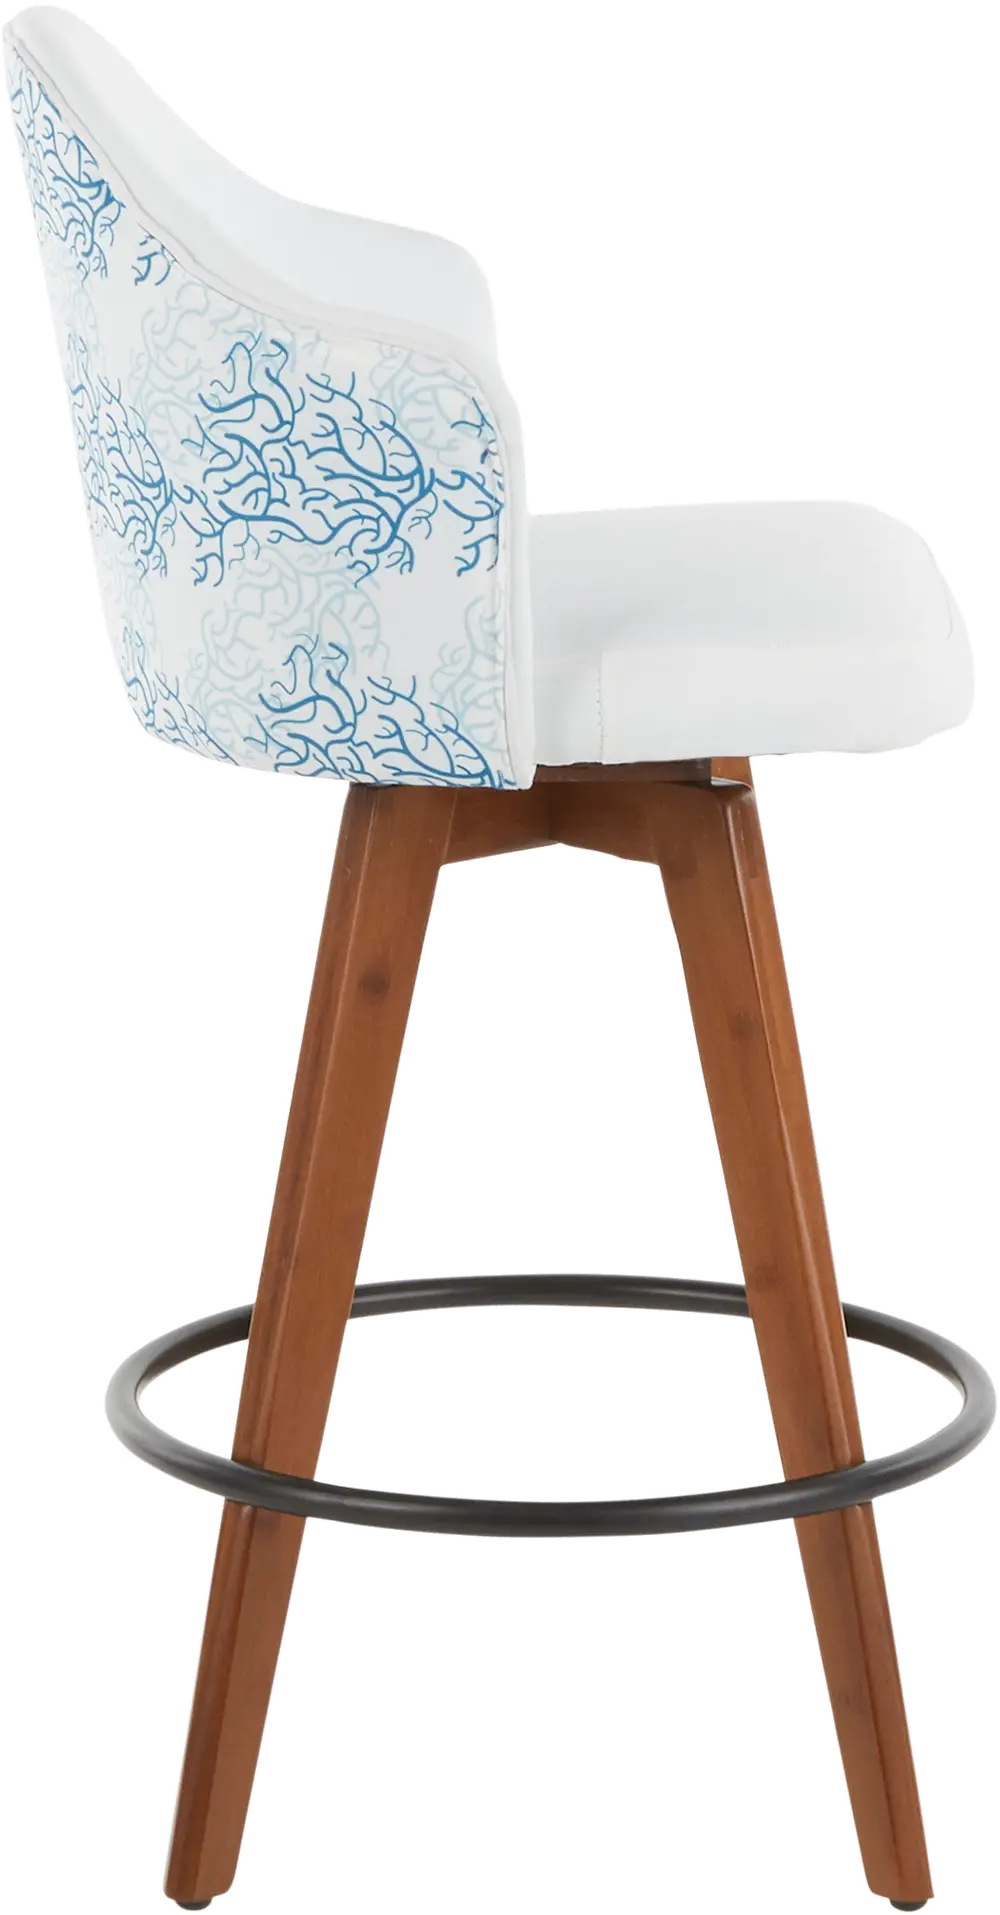 B26-AHOY CORAL WLW Contemporary White and Coral Decorative Swivel Counter Height Stool - Ahoy-1